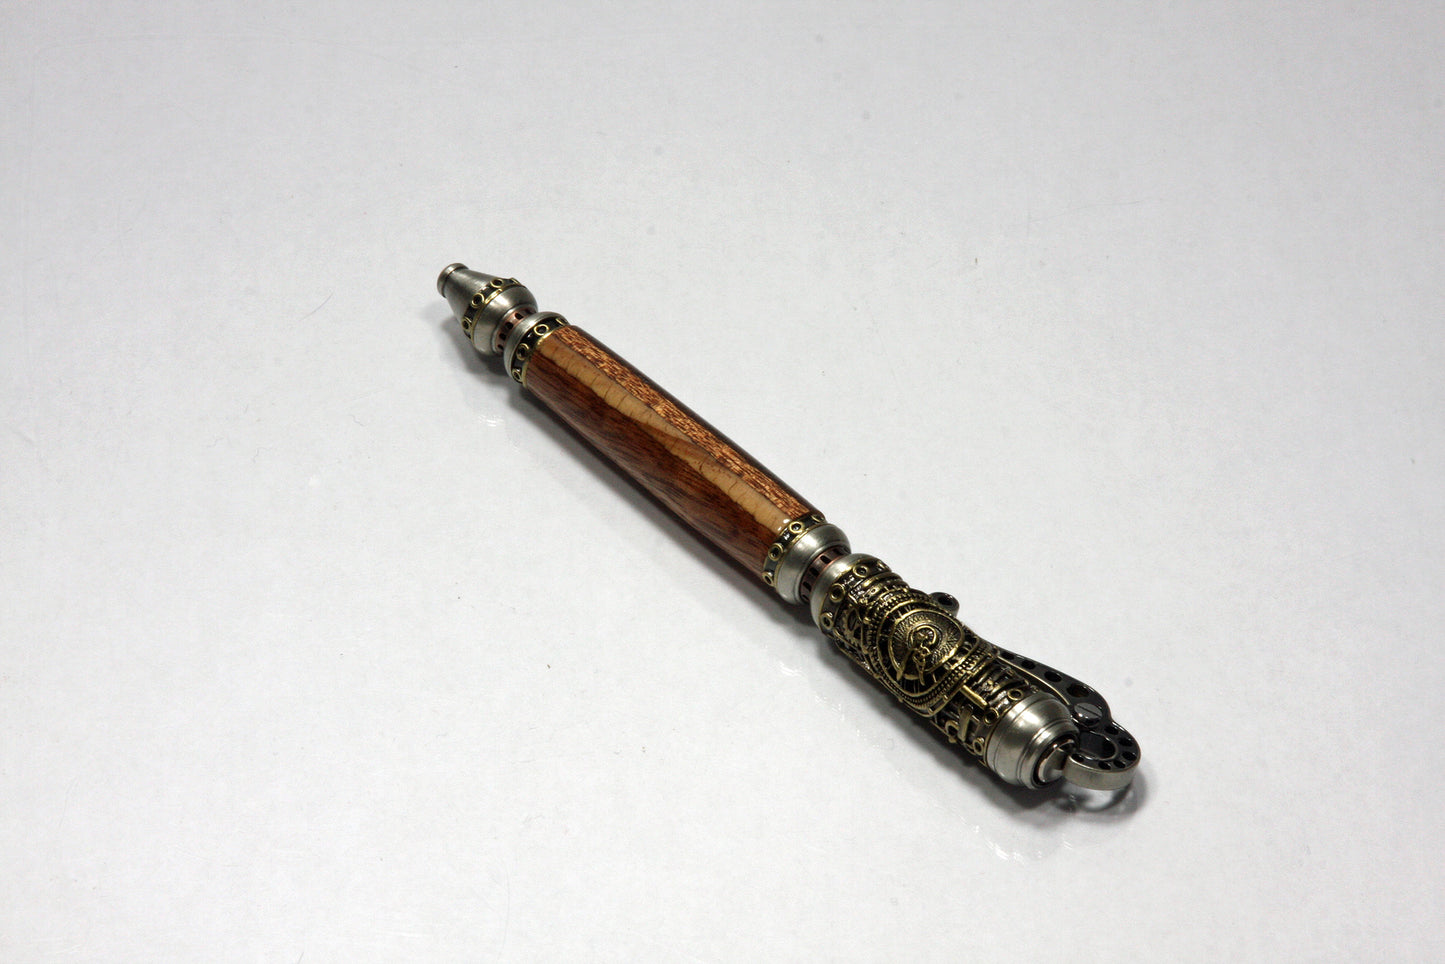 Vintage Dr. Who Steampunk Ballpoint Pen with Tardis Wood - Collector's Edition